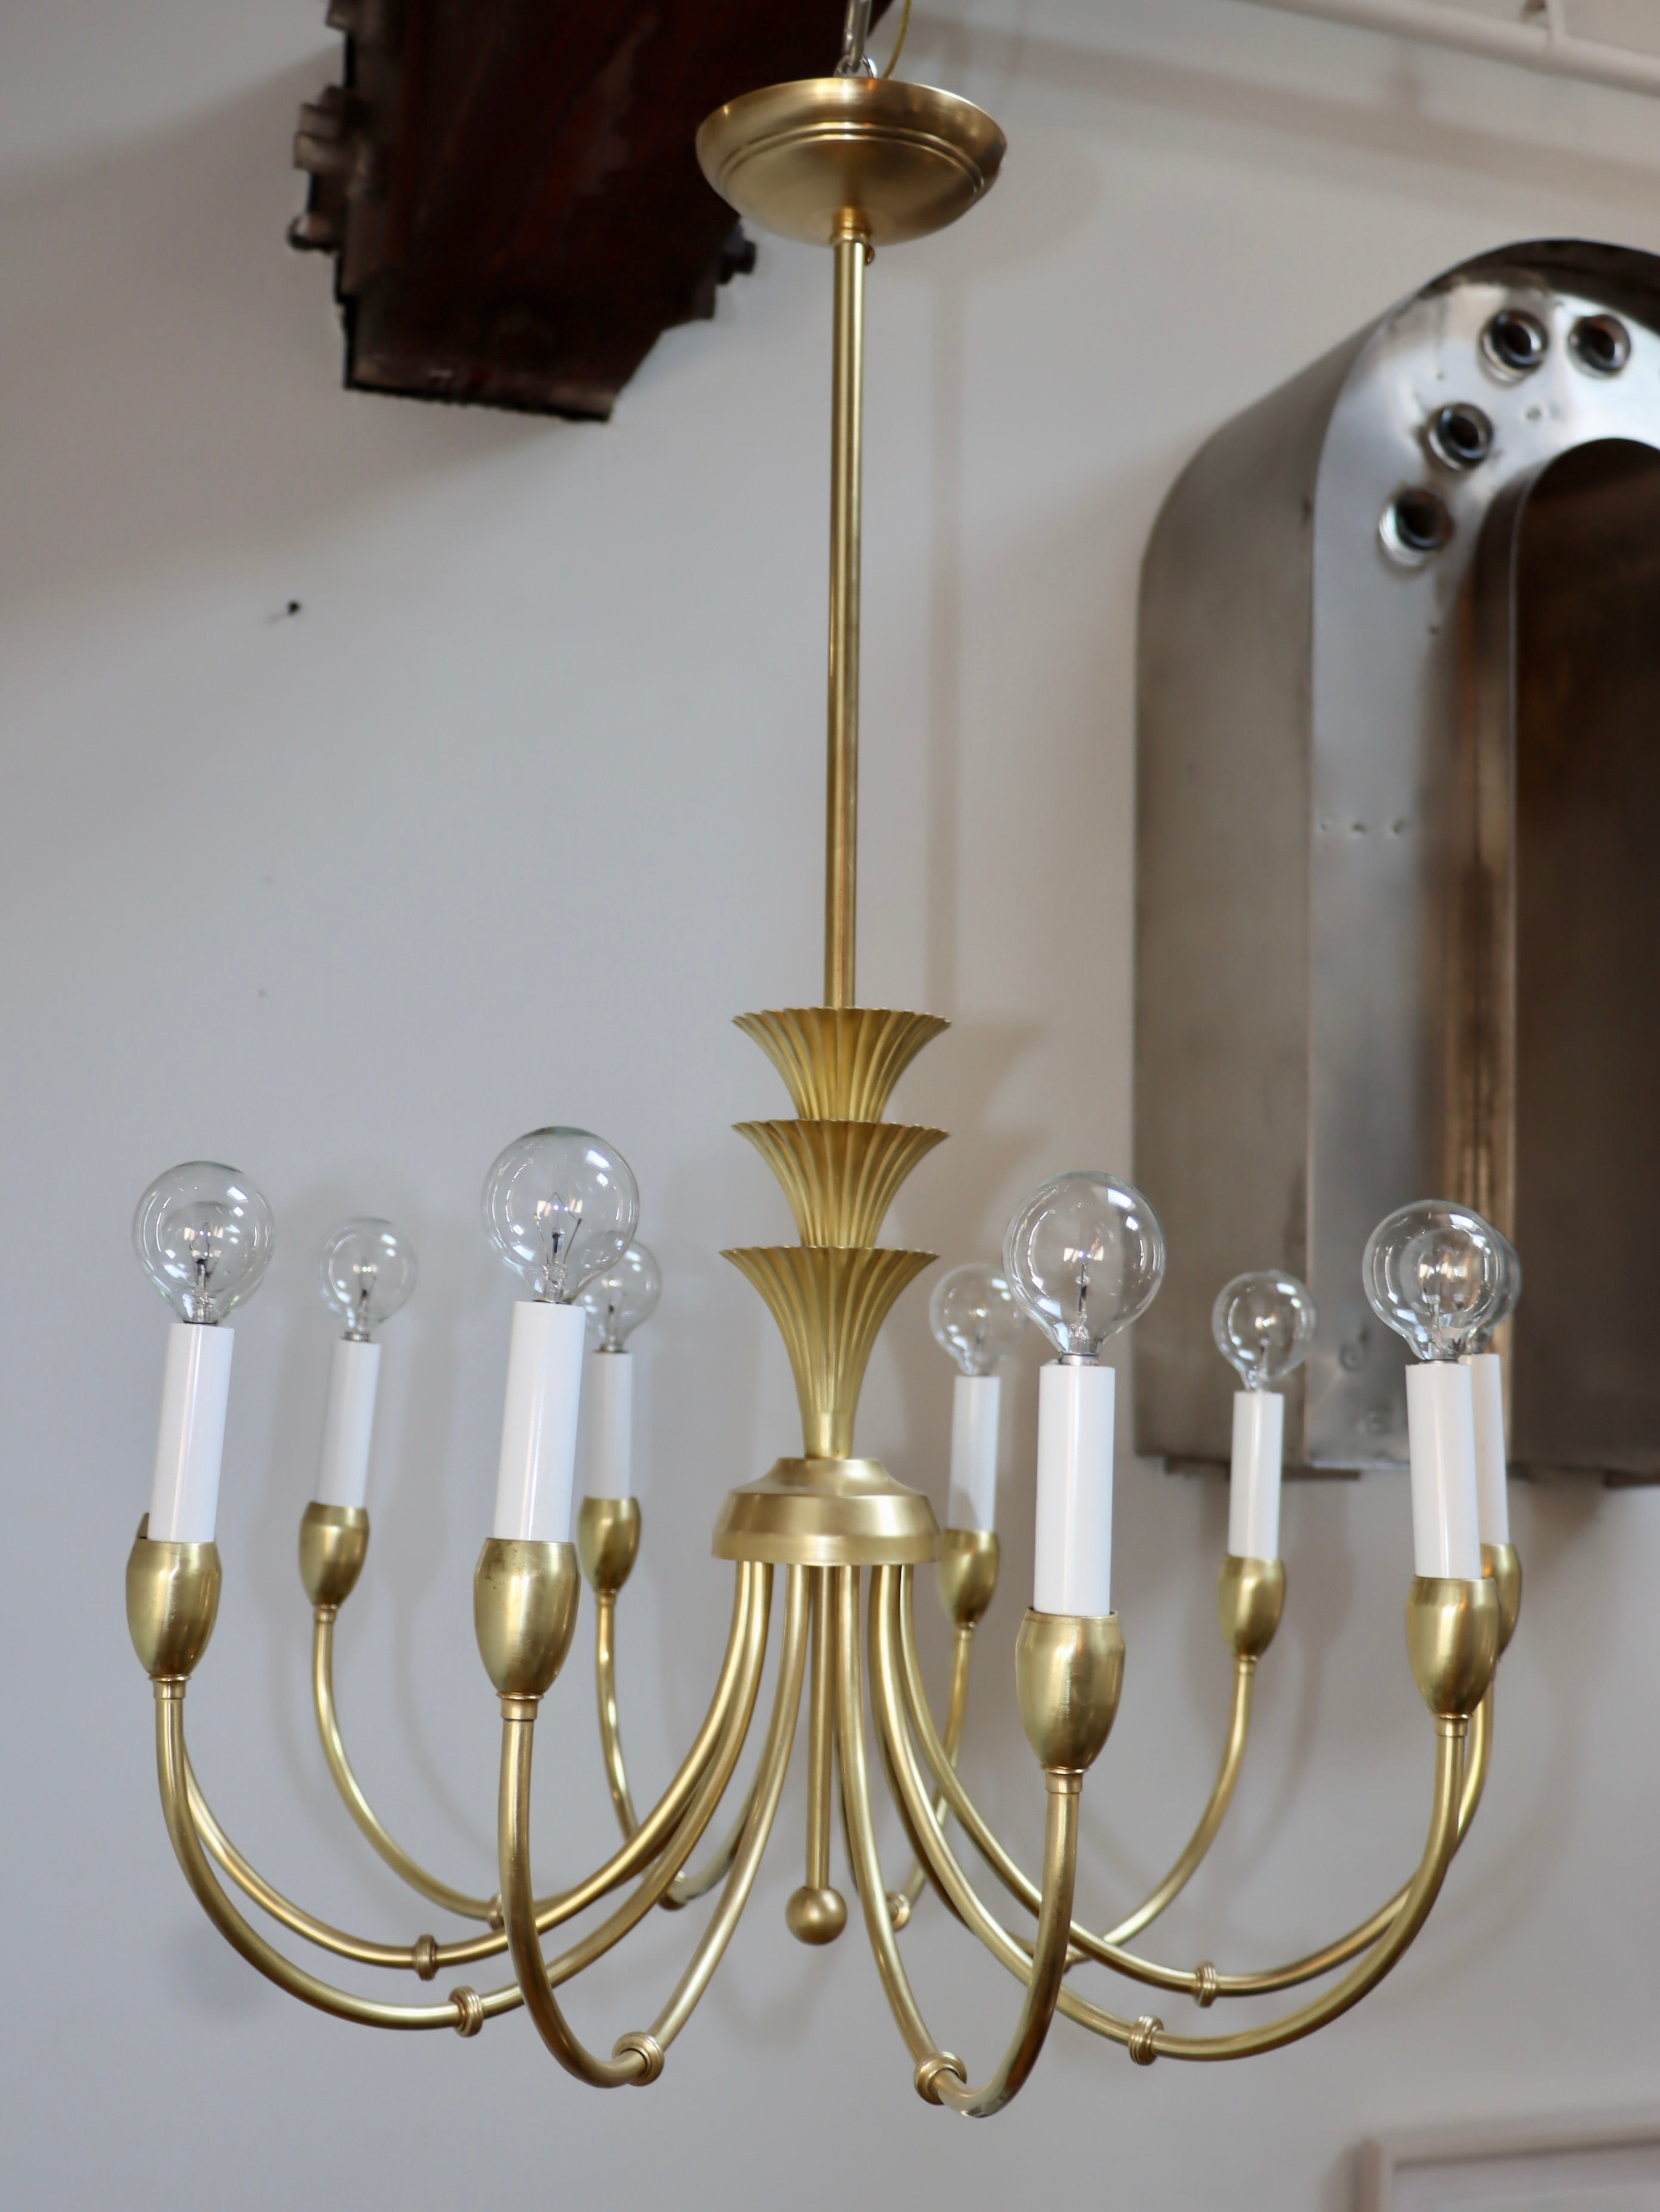 1950s Mid-Century Modern solid brass Italian chandelier in the style of Gio Ponti, fully restored and newly professionally rewired, ready to use with minor wear and patina due to age and use.